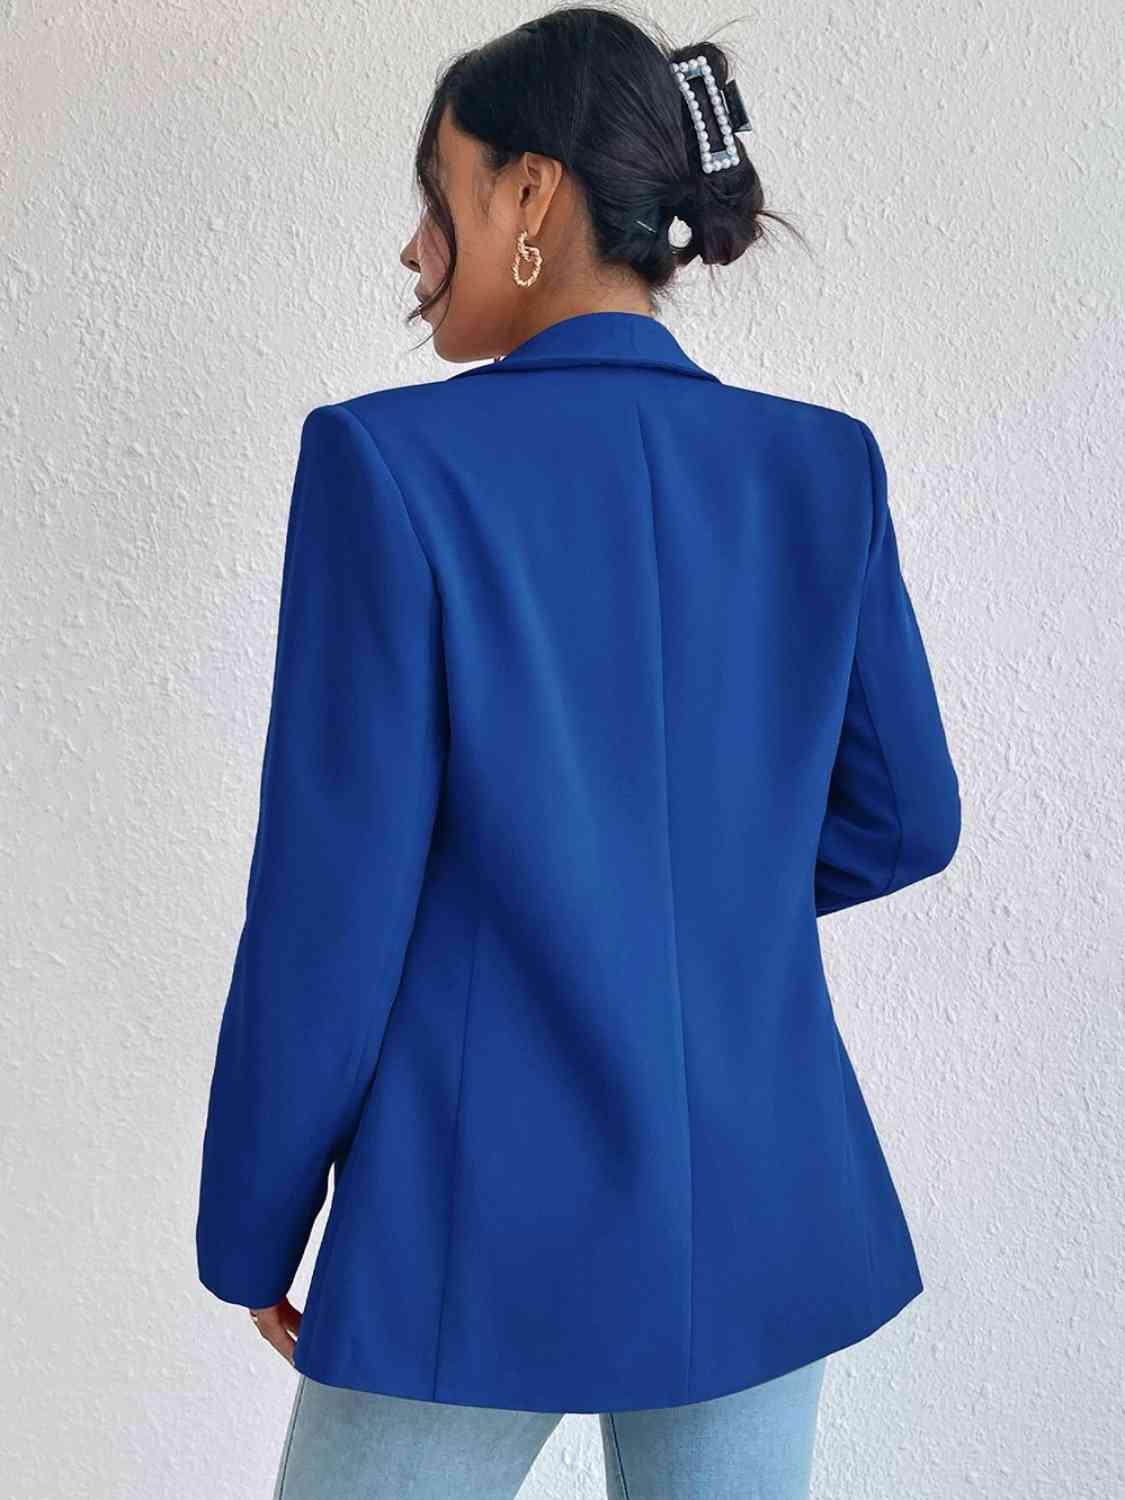 a woman wearing a blue blazer and jeans